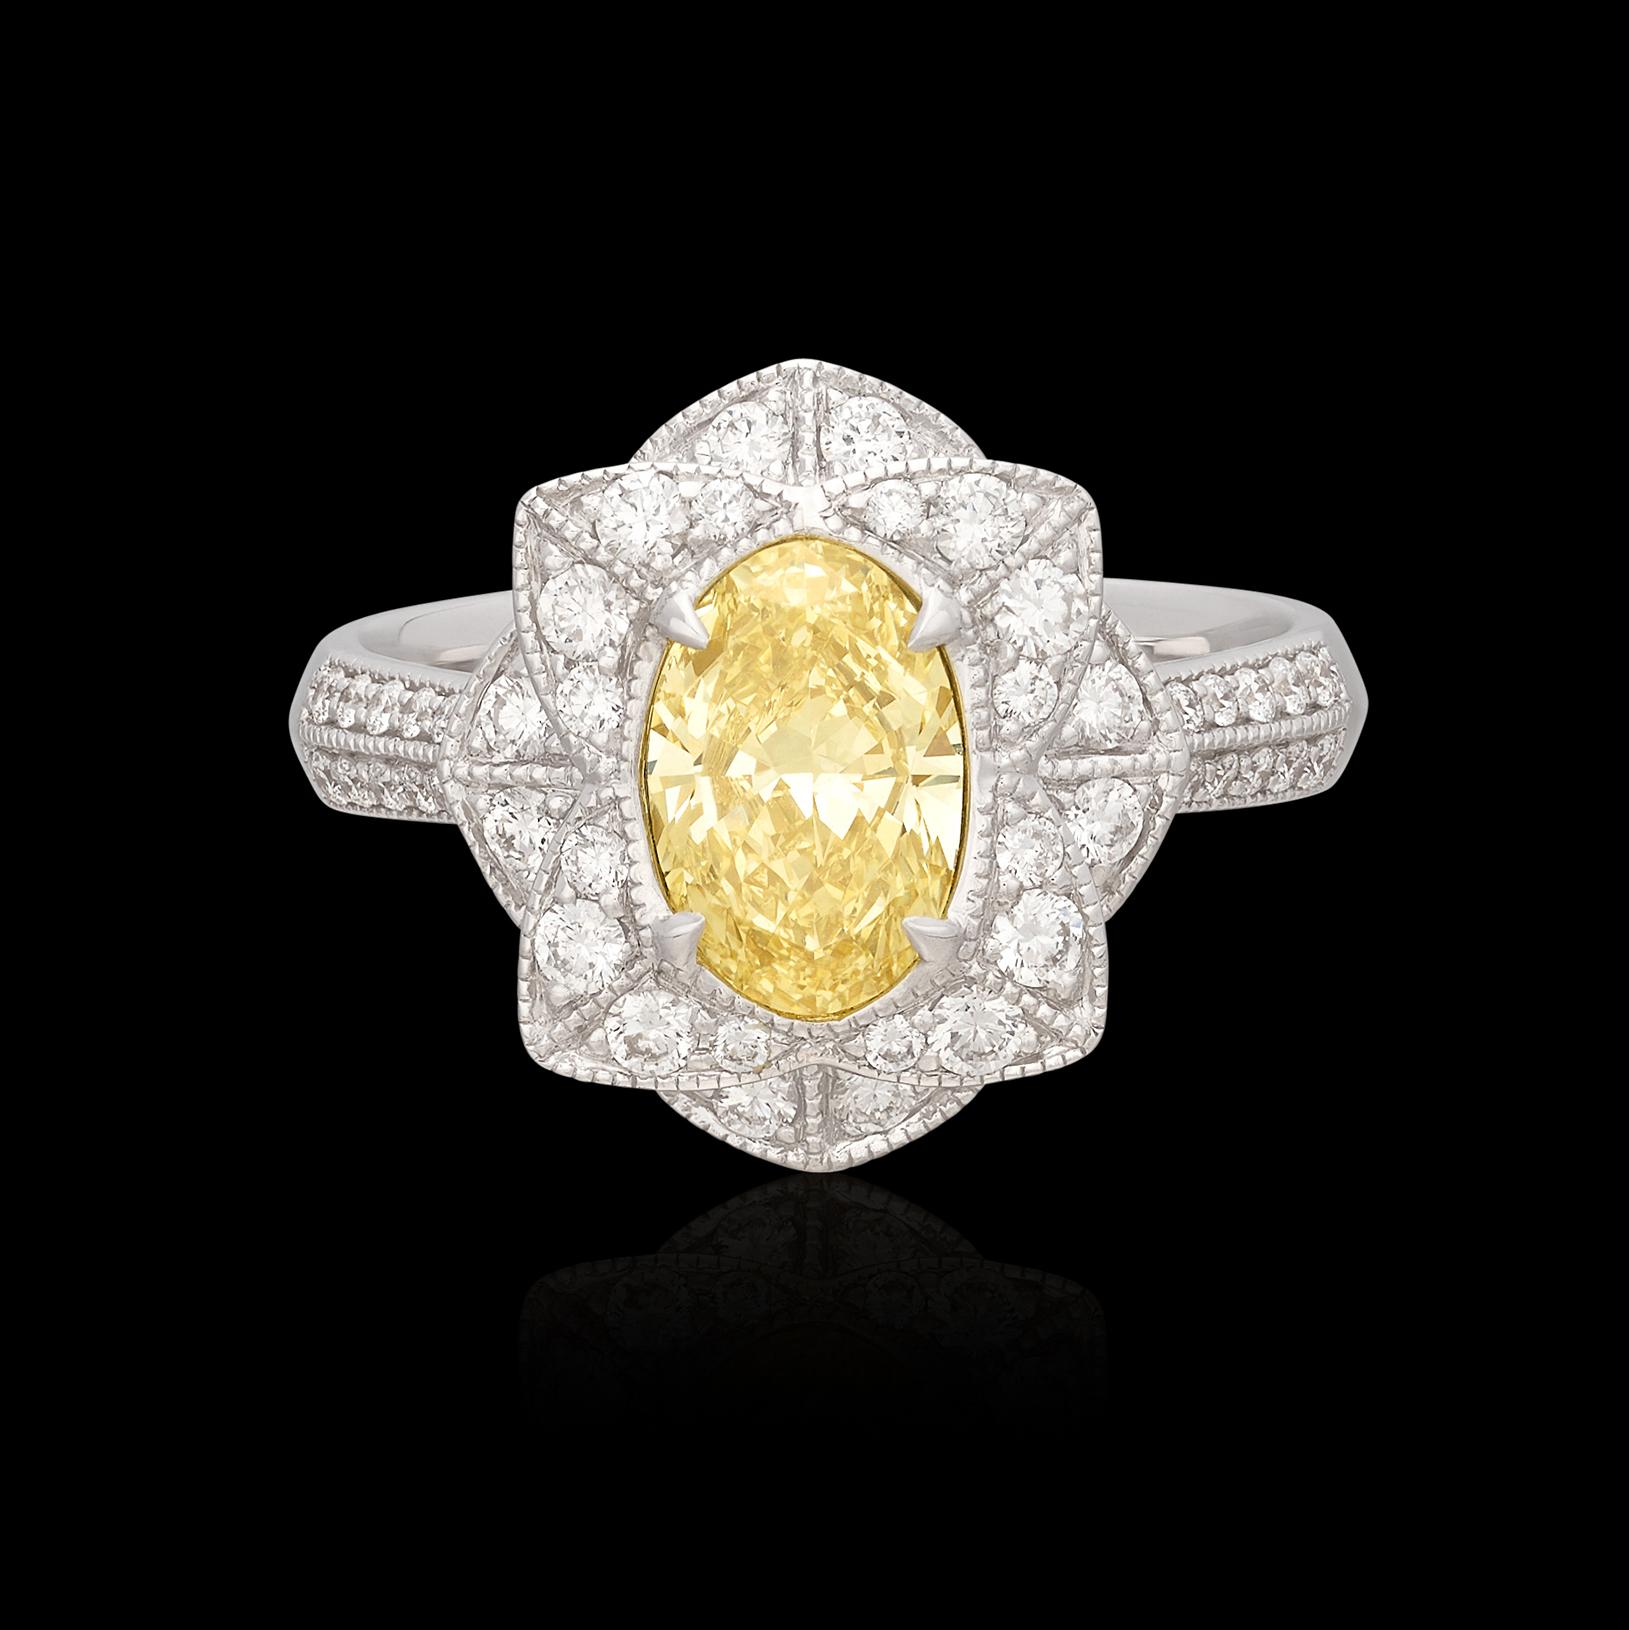 Bring in the sunshine with this lovely Salavetti yellow diamond ring! It centers an oval shaped diamond, weighing 1.35 carats, and measuring 9.0 x 5.9 x 3.15mm, a lovely lemon yellow color and VS2 clarity, it sits within a flower of 46 round